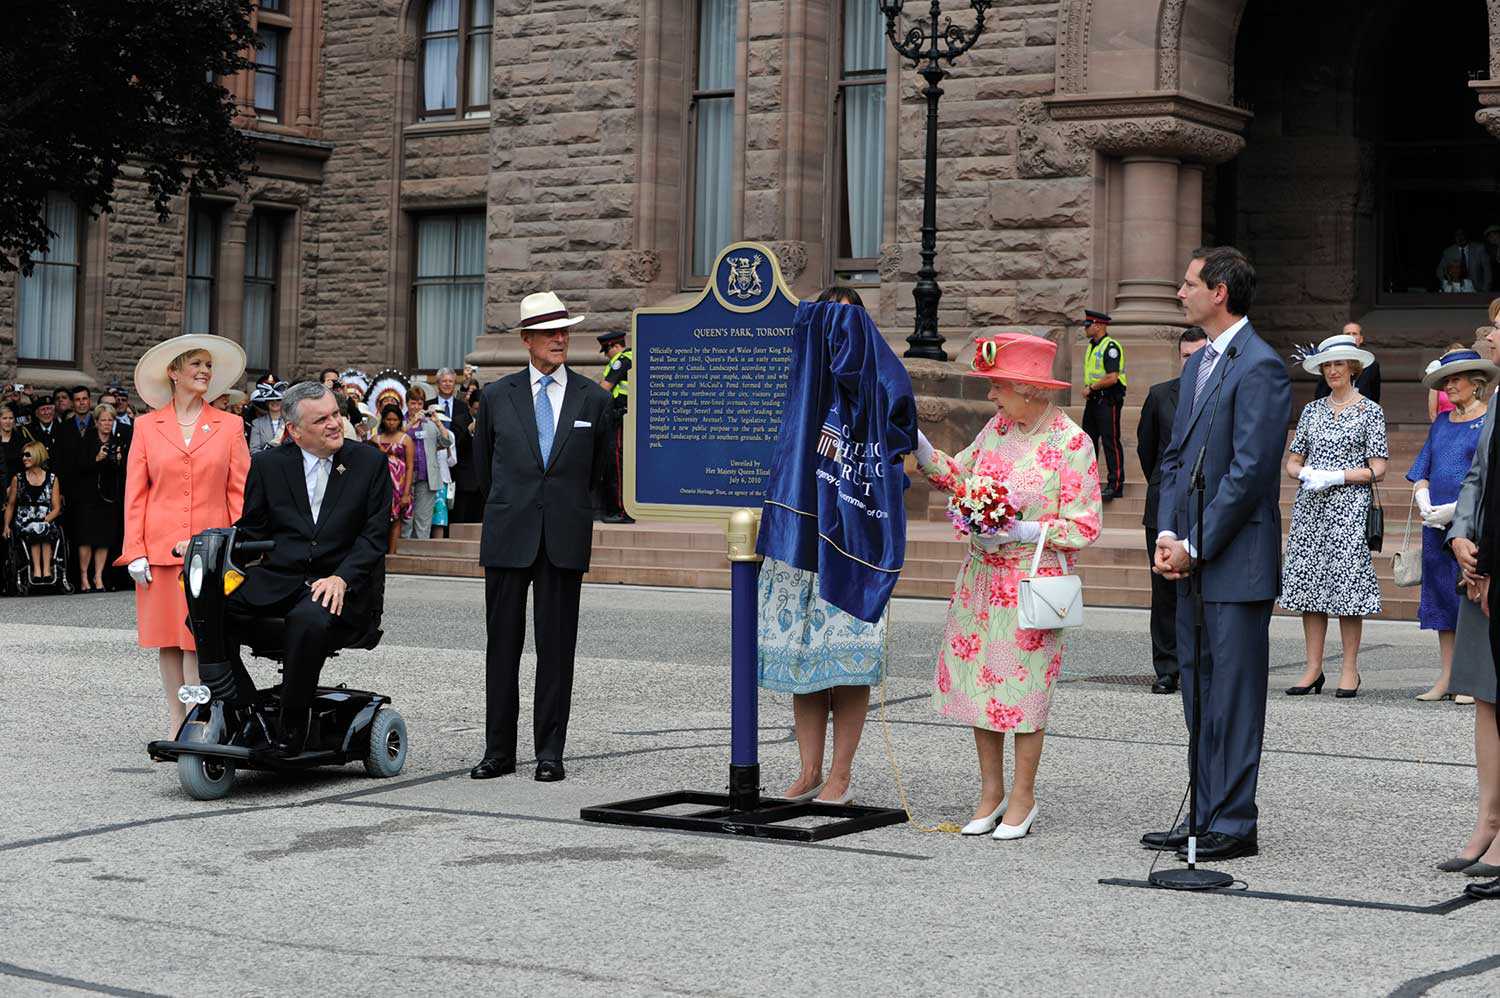 On July 6, 2010, Queen Elizabeth II unveiled a provincial plaque to commemorate the 150th anniversary of Queen’s Park (Photo: Rick Chard)